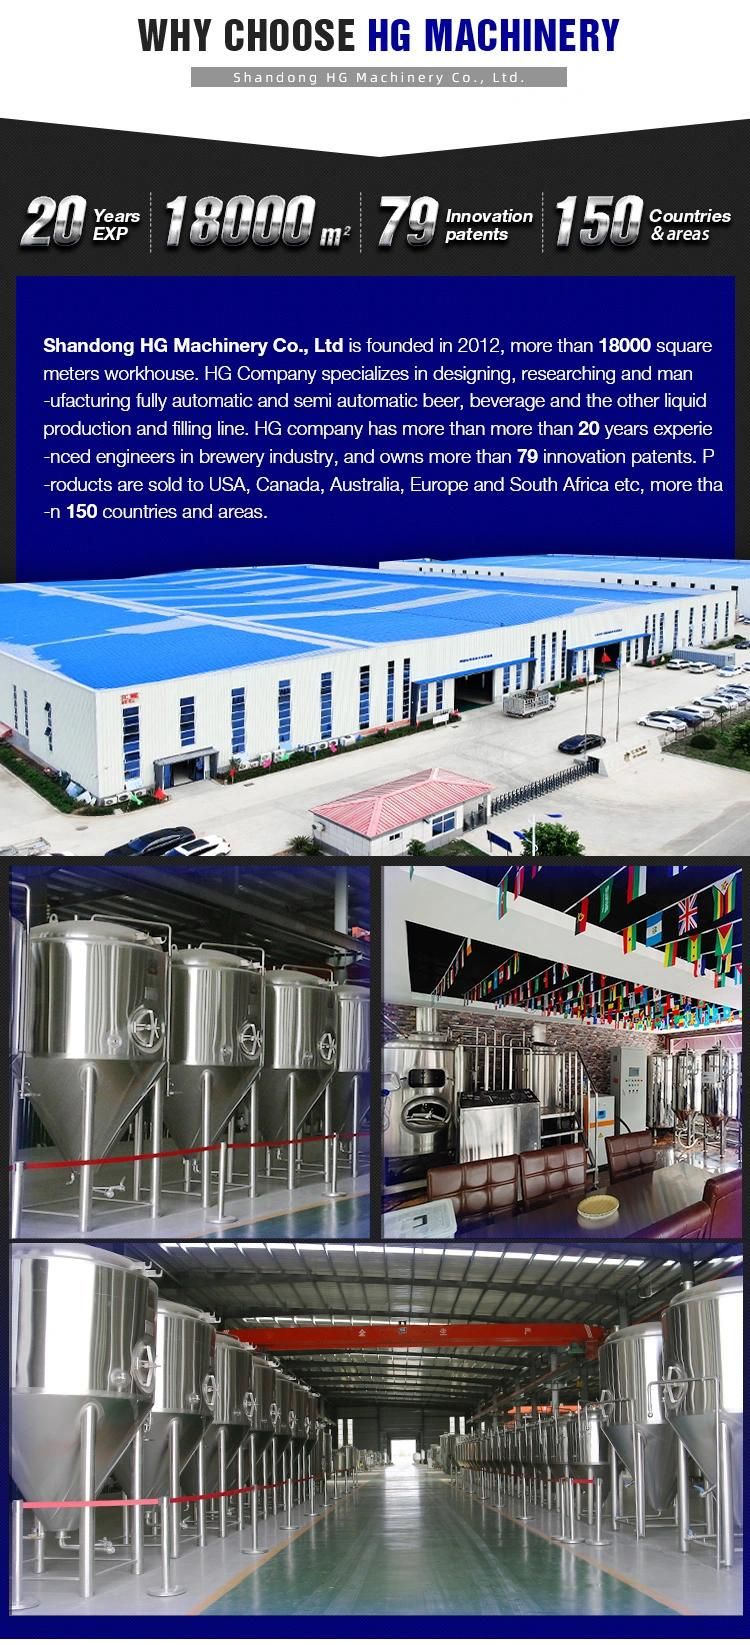 High Quality Cheap 5000L Conical Fermenter Stainless Steel Wine Beer Fermentation Tanks